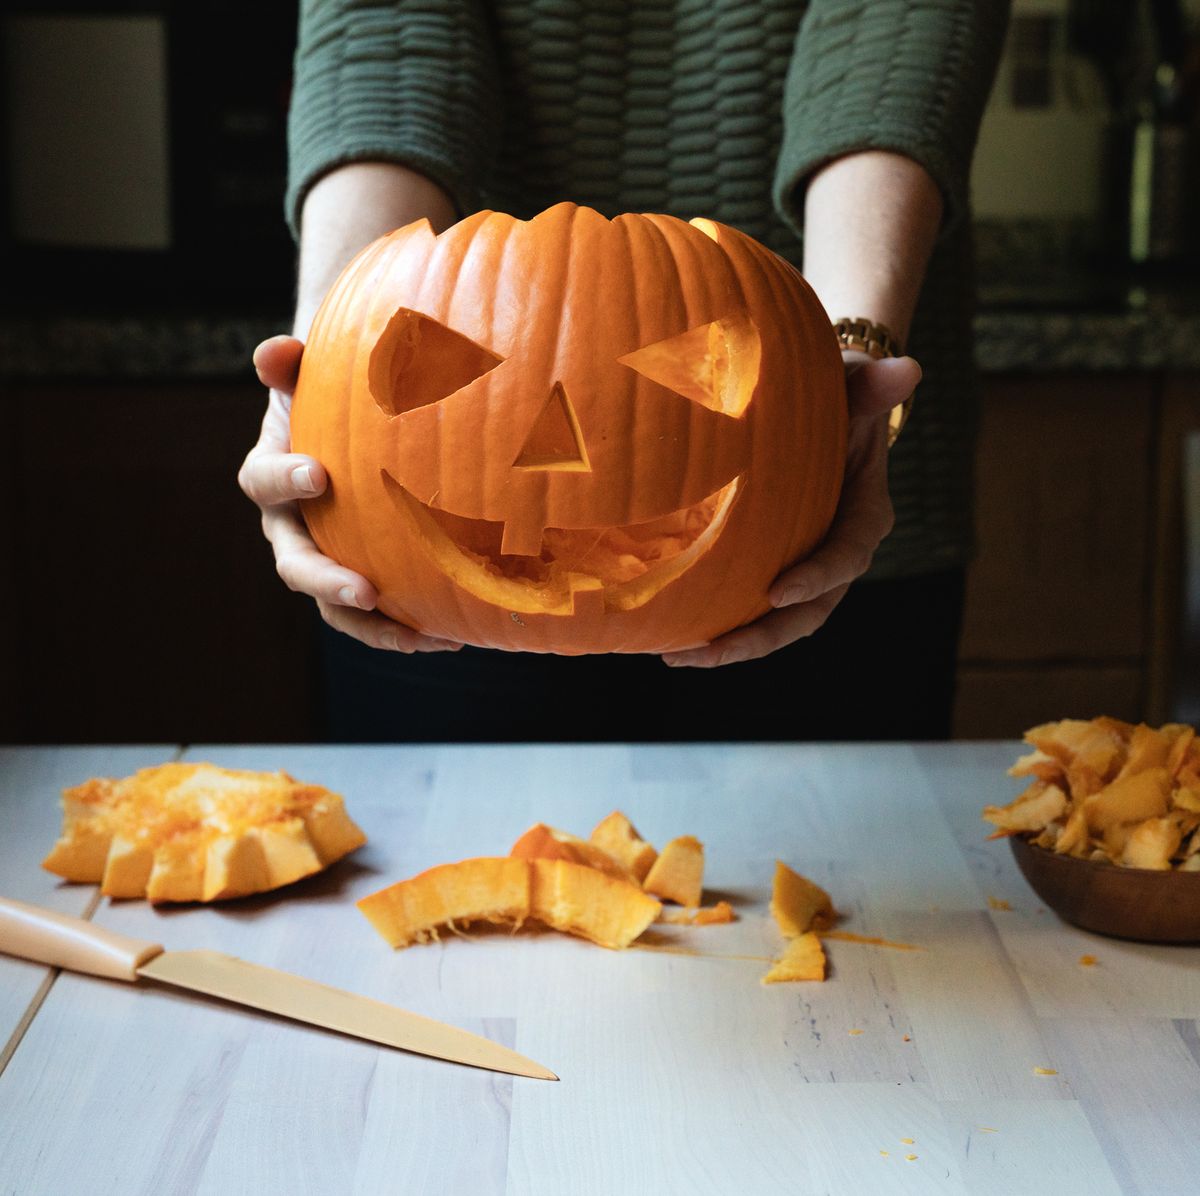 Carving Pumpkins: Tips, Tricks, and Ideas for Spooky Halloween Fun!